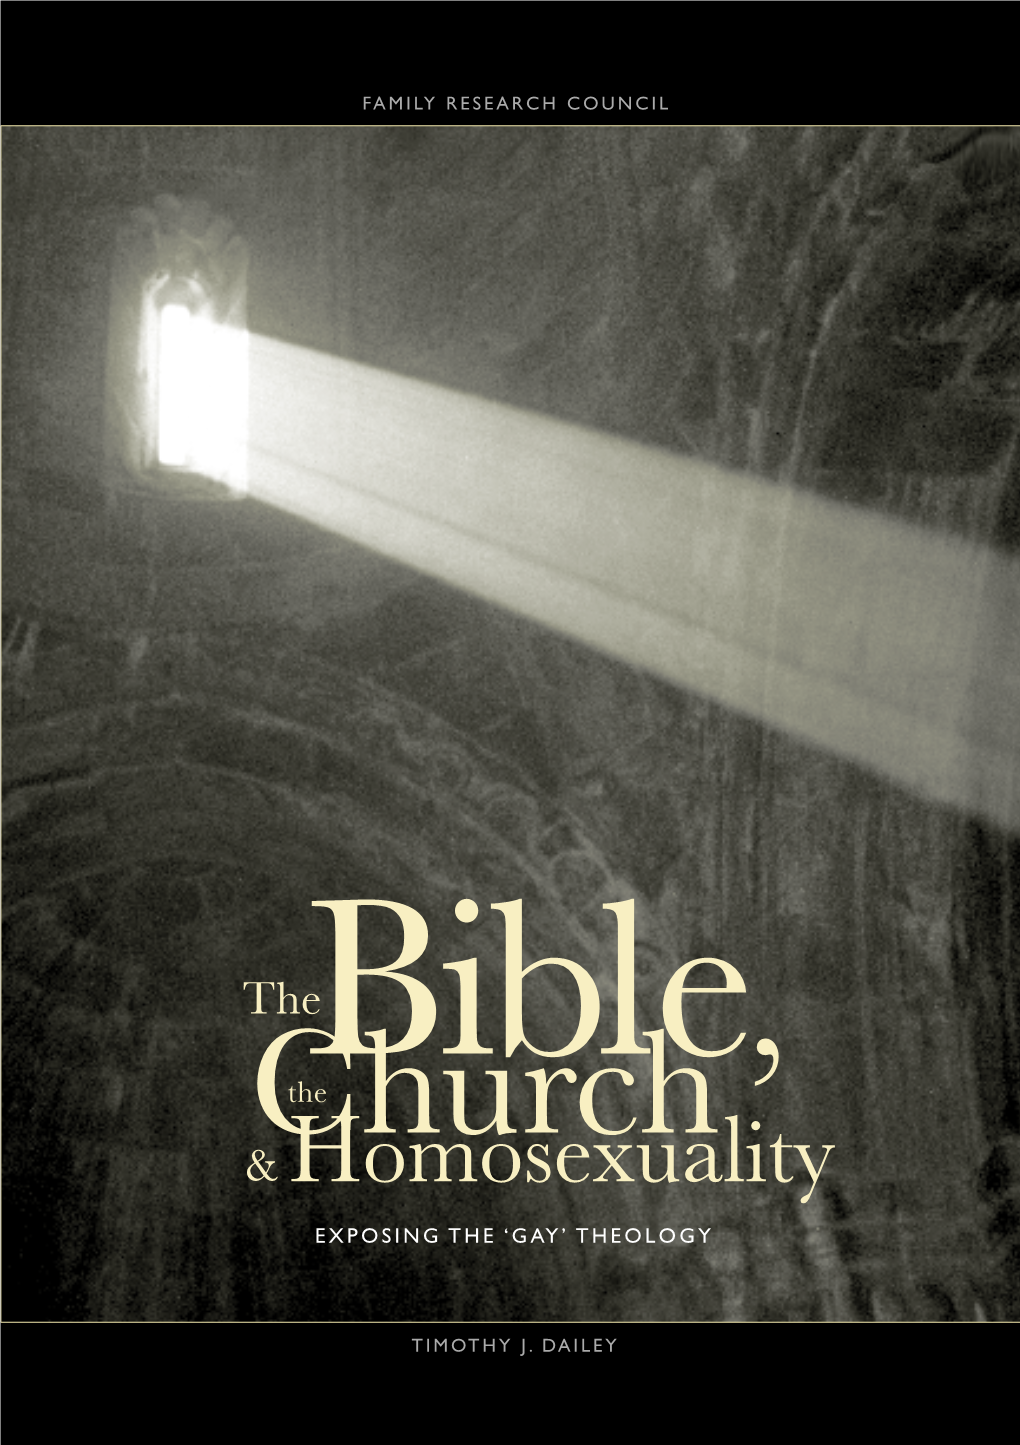 The Bible, the Church, & Homosexuality